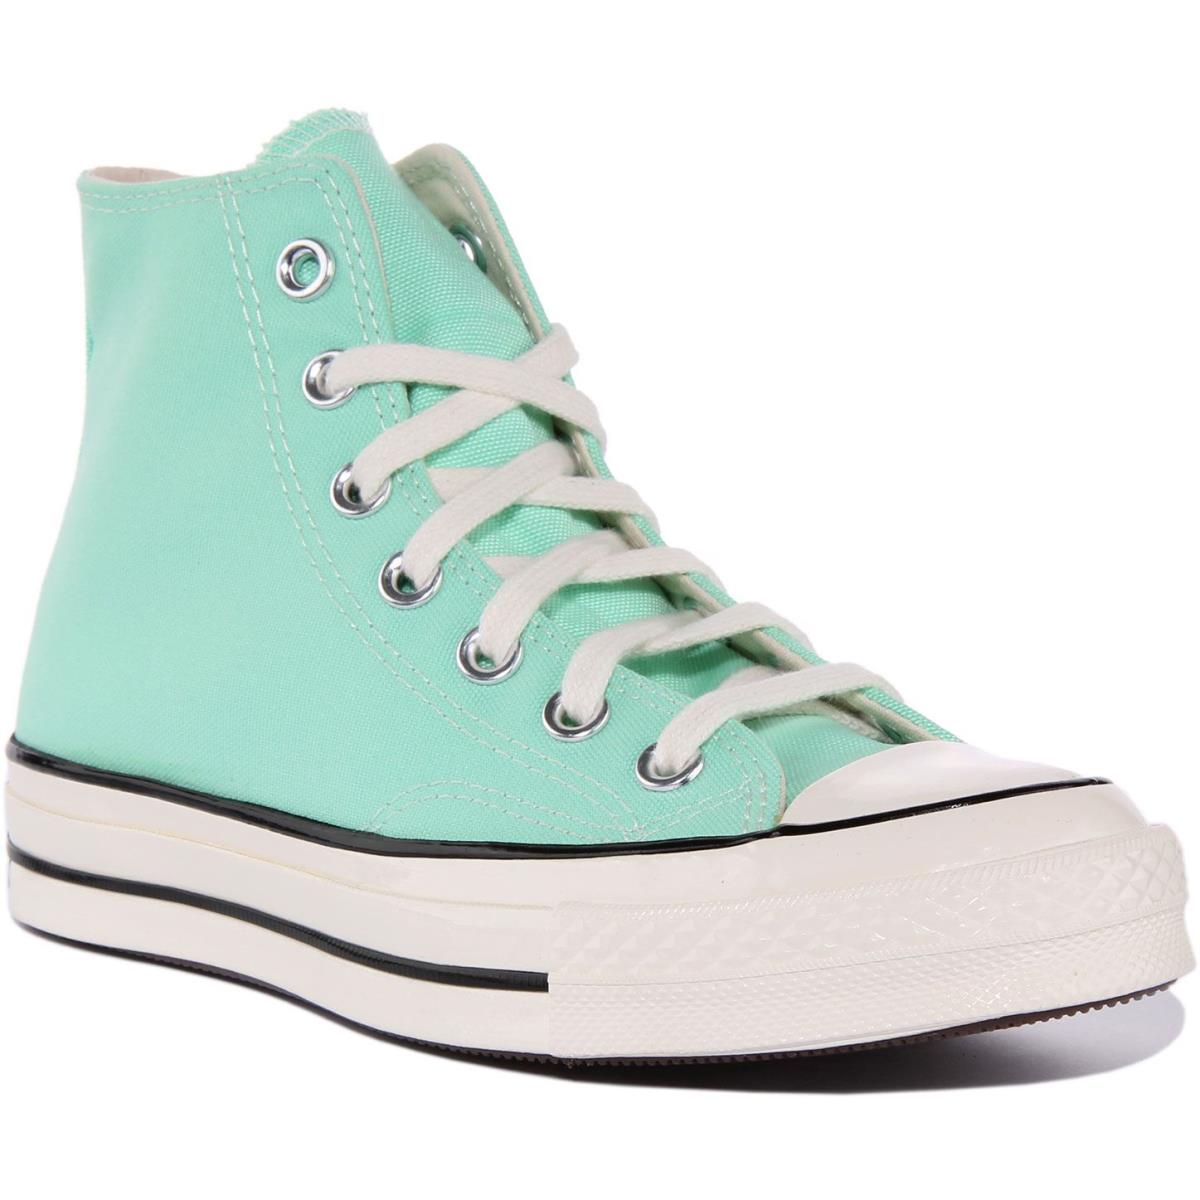 Converse A00748C Chuck 70s Recycled Canvas Sneakers In Mint Size US 4 - 13 MINT